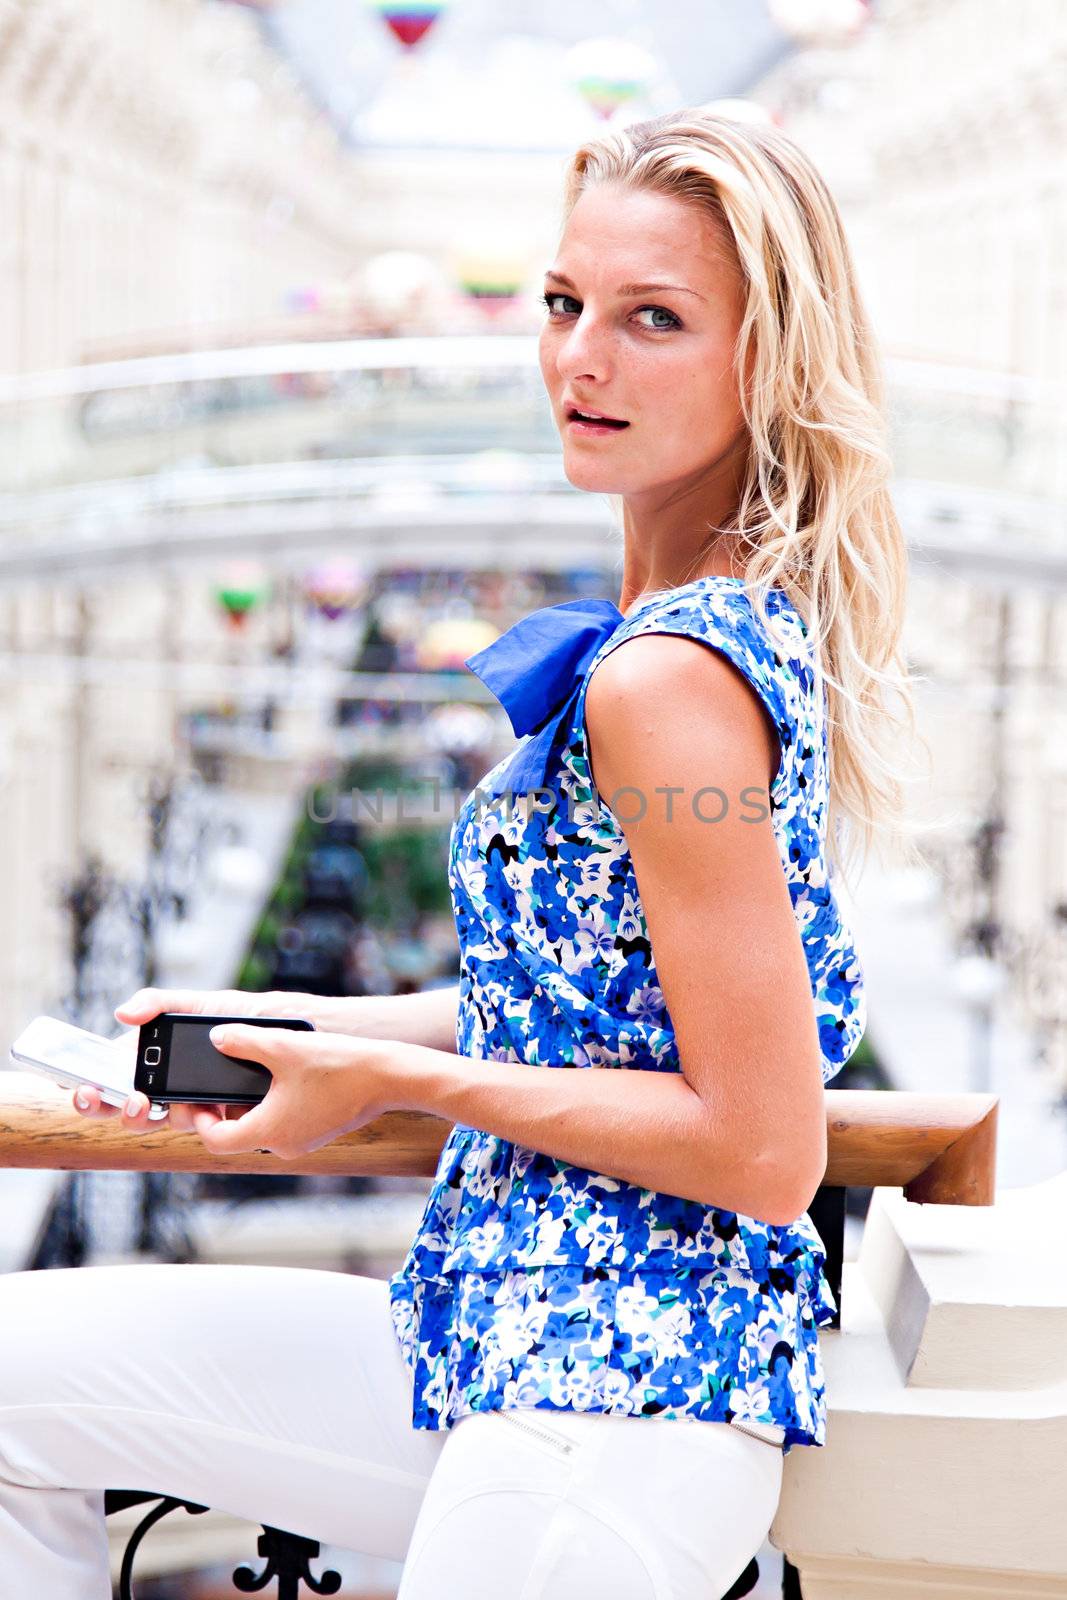 The woman on the phone at the mall by korvin79